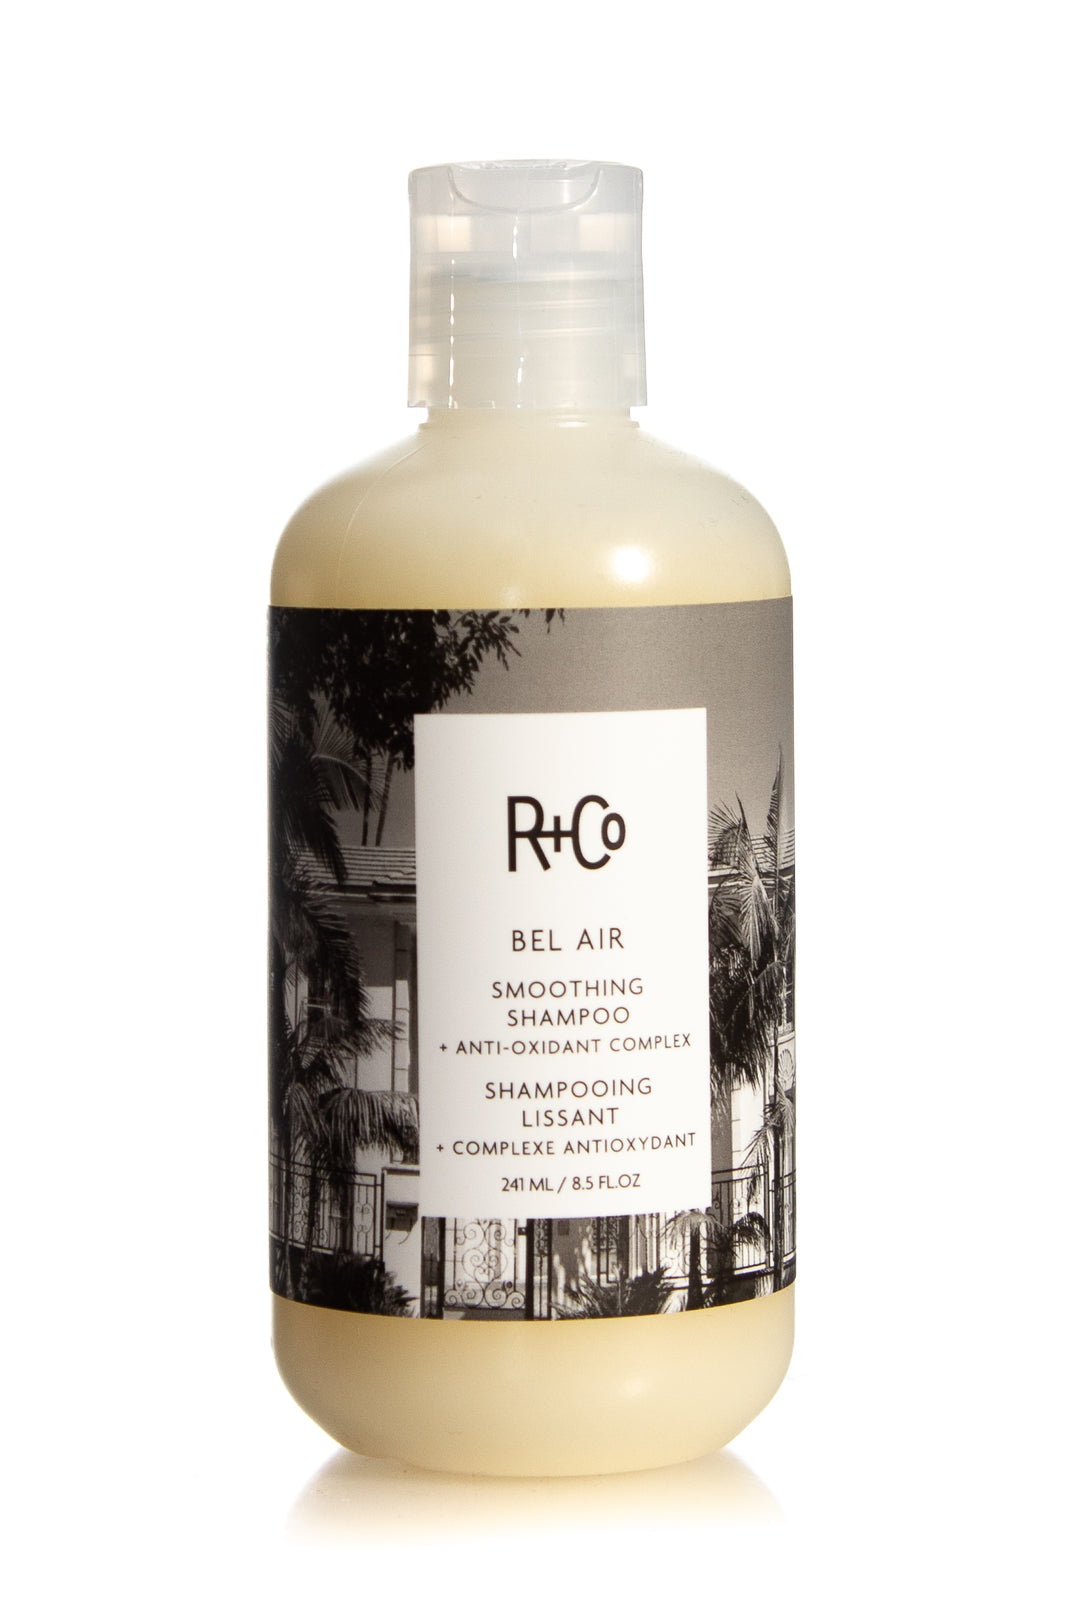 R+Co Bel Air Shampoo This cleanser is enhanced with powerful smoothing properties specifically designed to lock in a seriously silky overall look000 and feel, Perfect for thick, curly or frizz-prone hair.